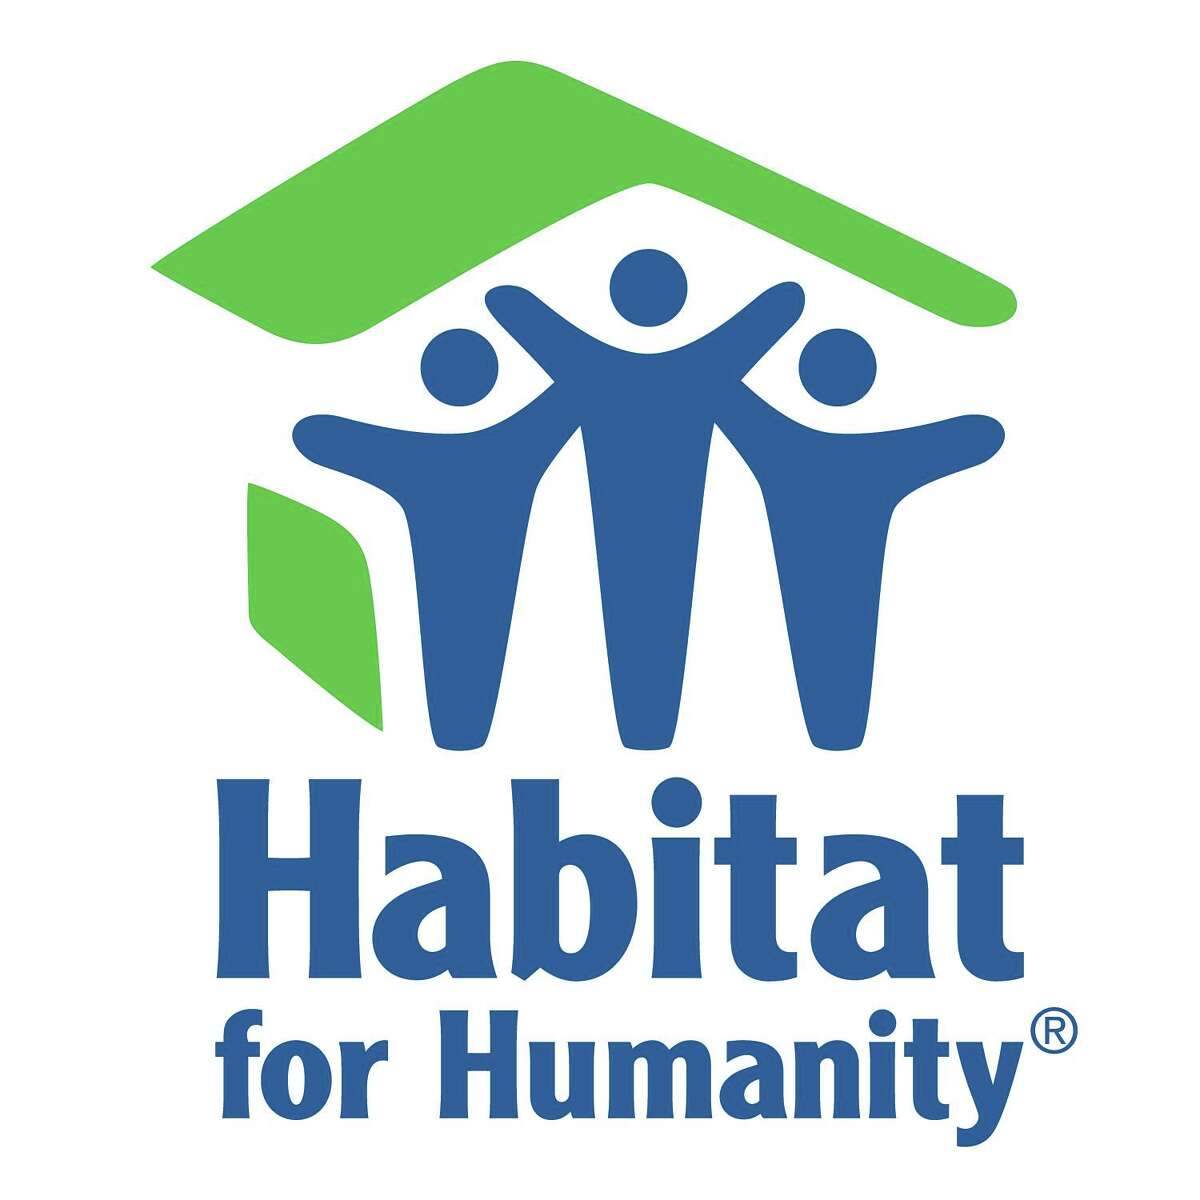 New directors, officers and committee chairs were elected at an annual meeting of Habitat for Humanity of Benzie County.